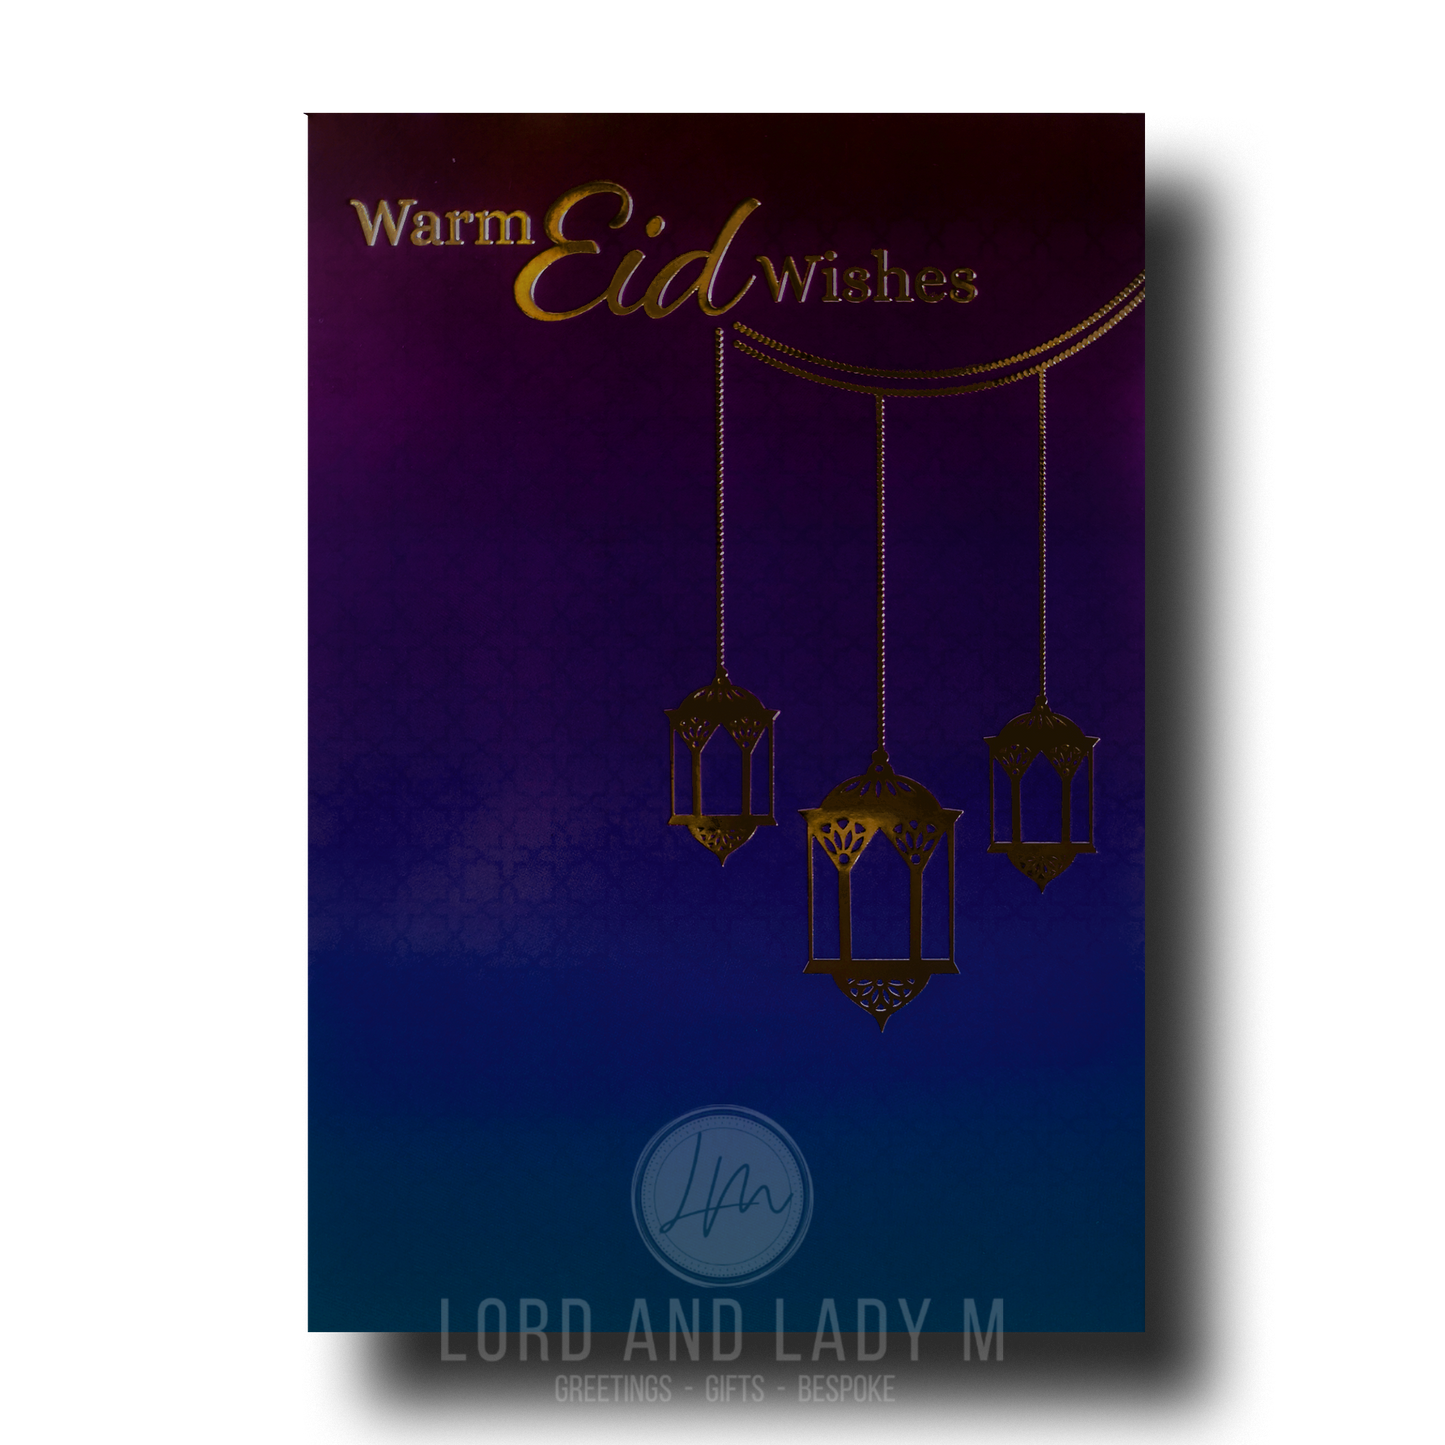 19cm - Warm Eid Wishes - Purple Teal Ombre & Gold Greeting Card - BGC